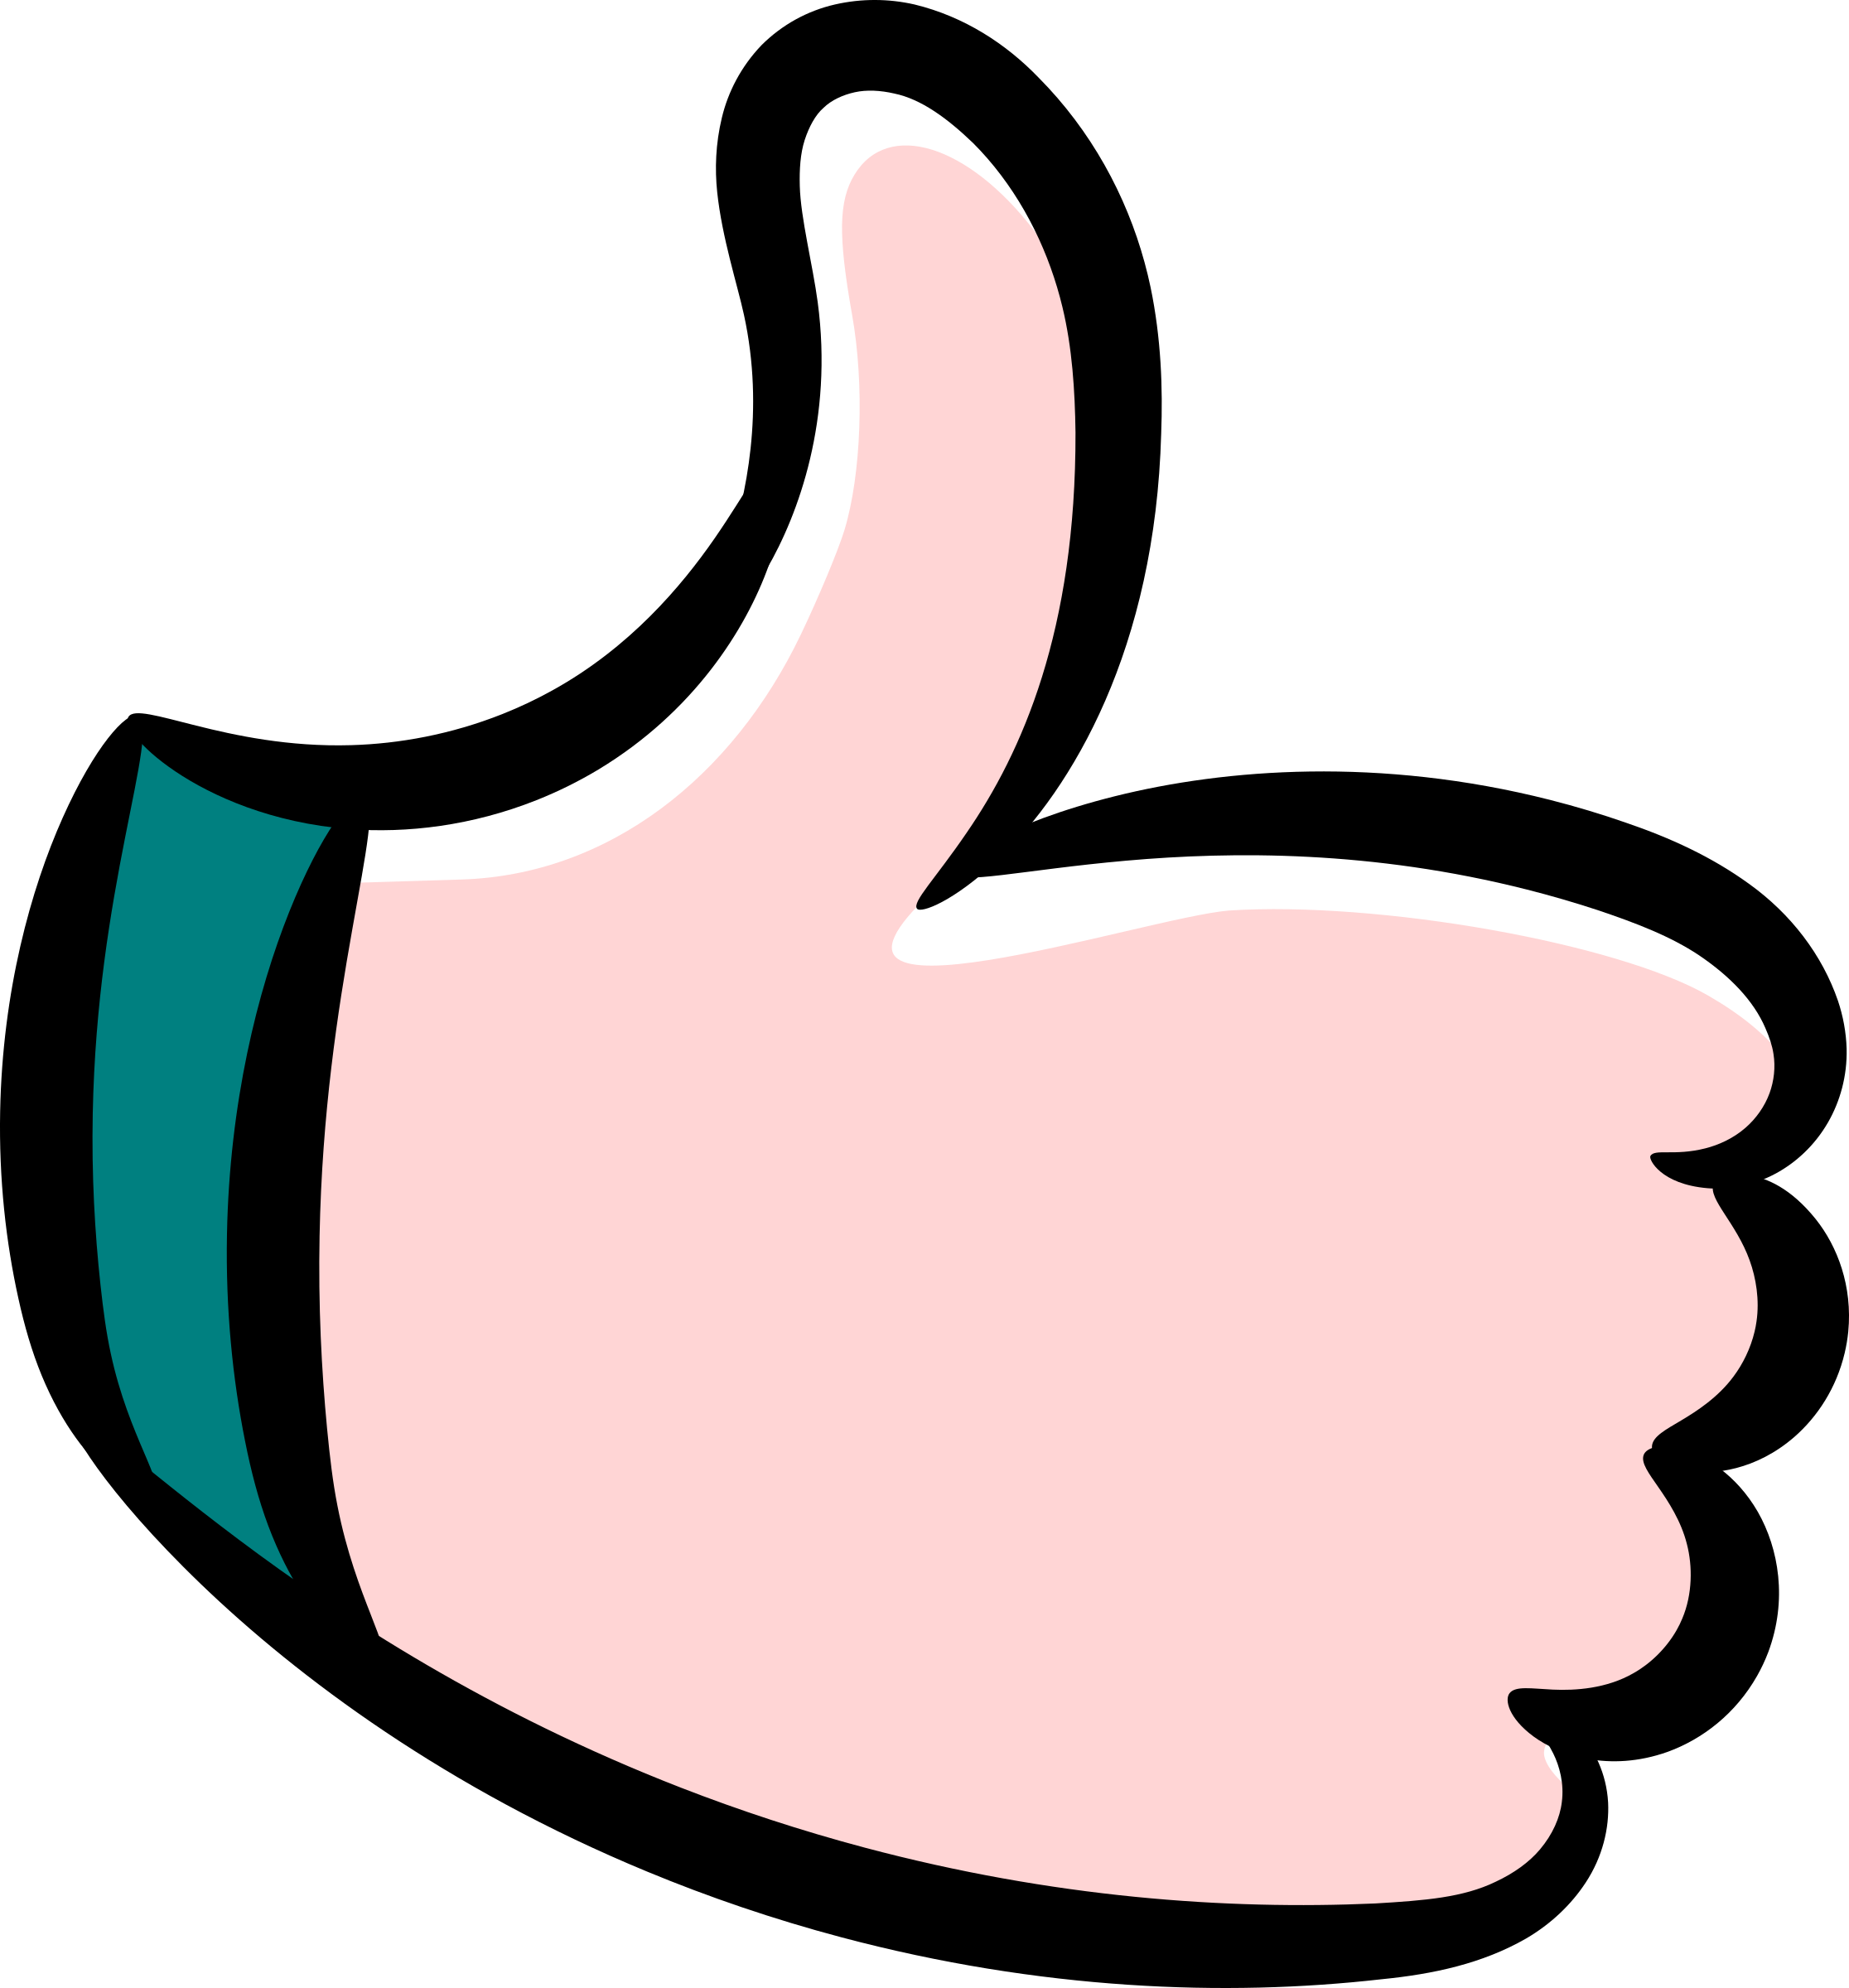 Thumbs up clipart microsoft